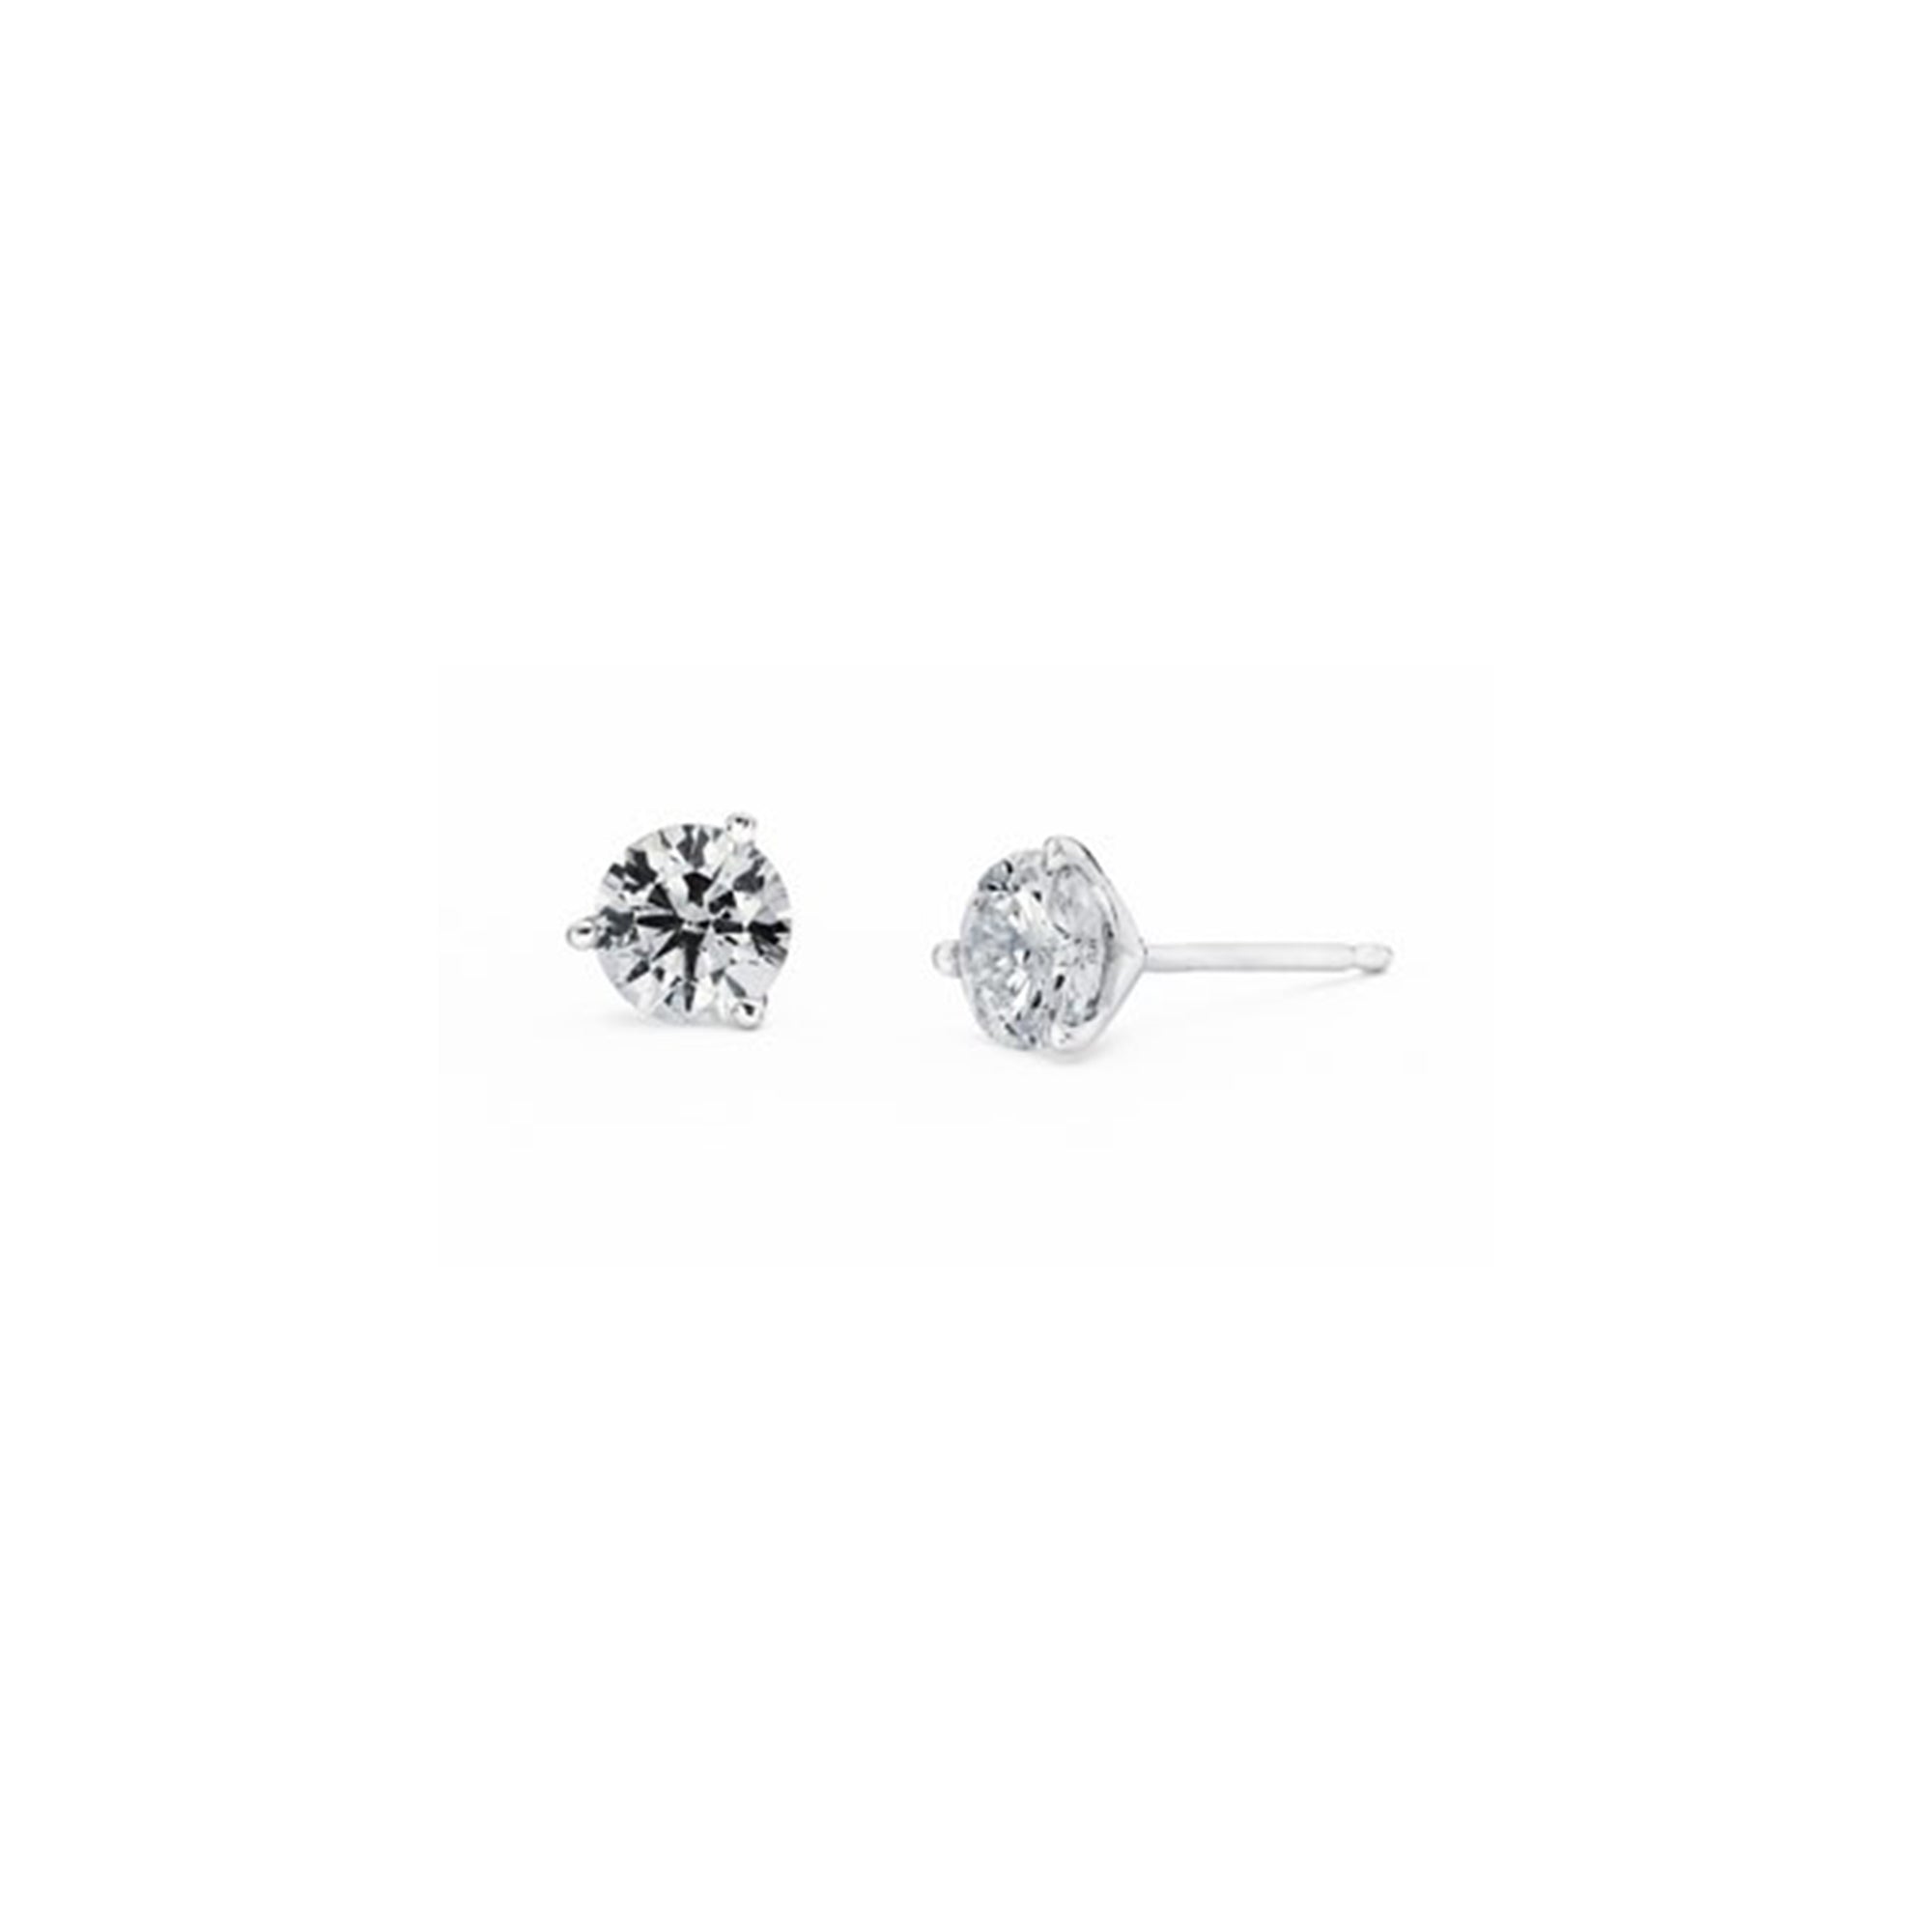 Diamond Stud 3-Prong Earrings, 0.25 Carat Total Weight in 14k White, Yellow or Rose Gold - Talisman Collection Fine Jewelers